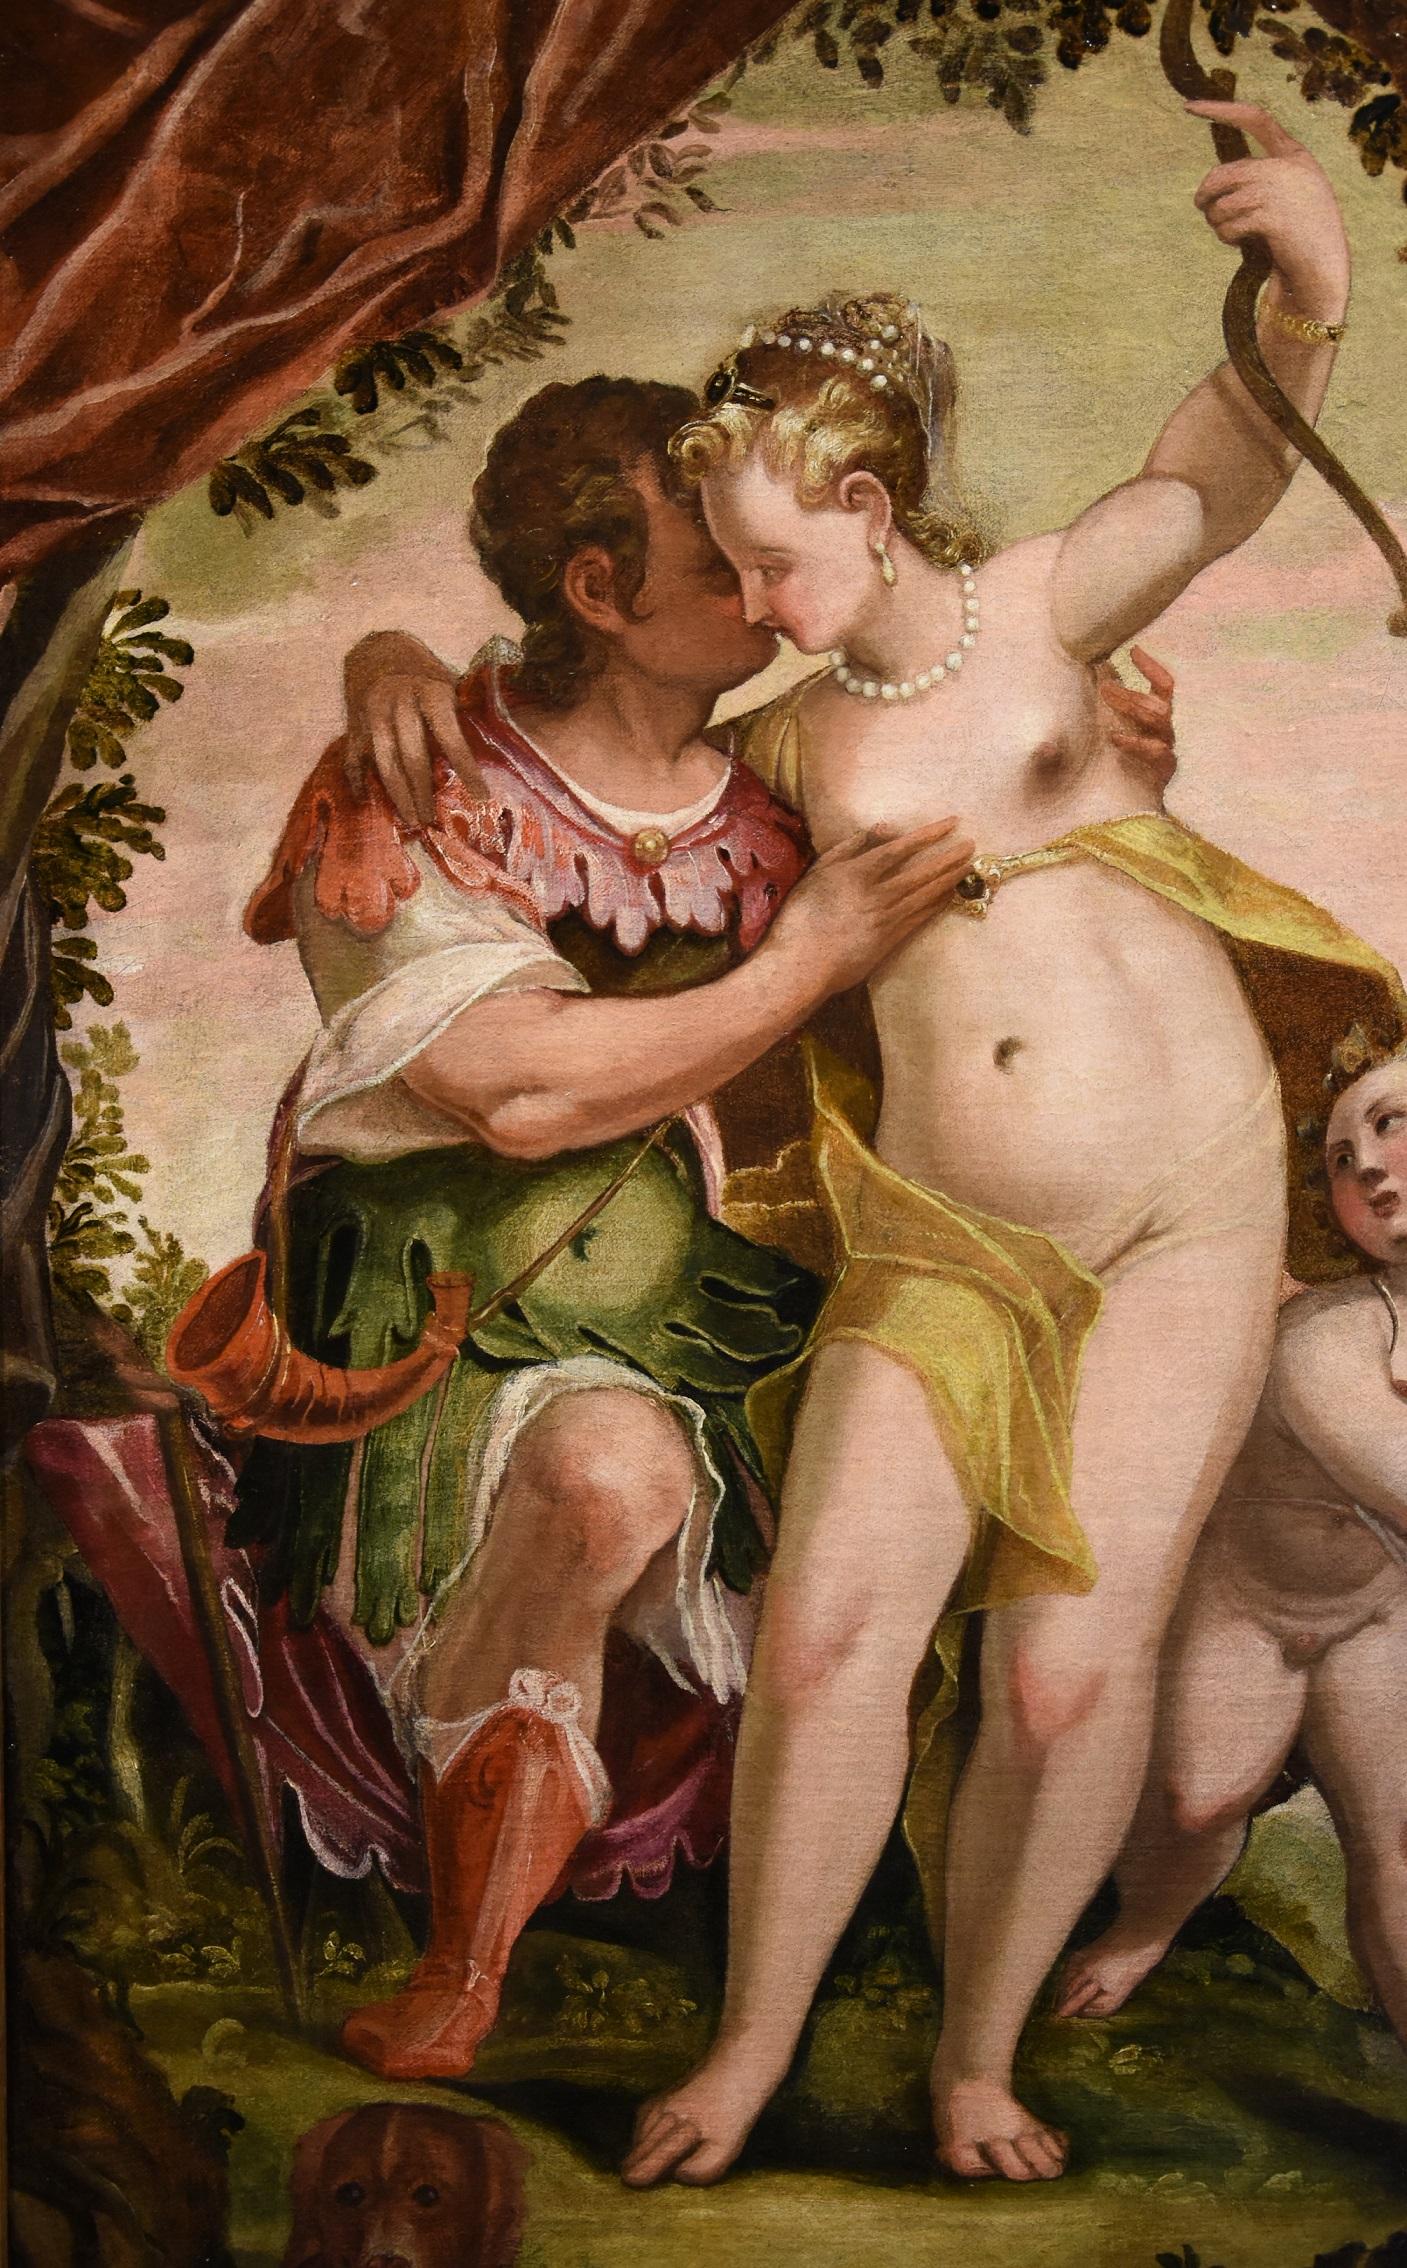 Antichità Castelbarco SRLS is proud to present:

Paolo Caliari known as Veronese (Verona 1528 - Venice 1588) Workshop/cercle
Idyll between Venus and Adonis with Cupid

Oil on canvas
96 x 67 cm - Framed 122 x 92

The subject of this painting is taken